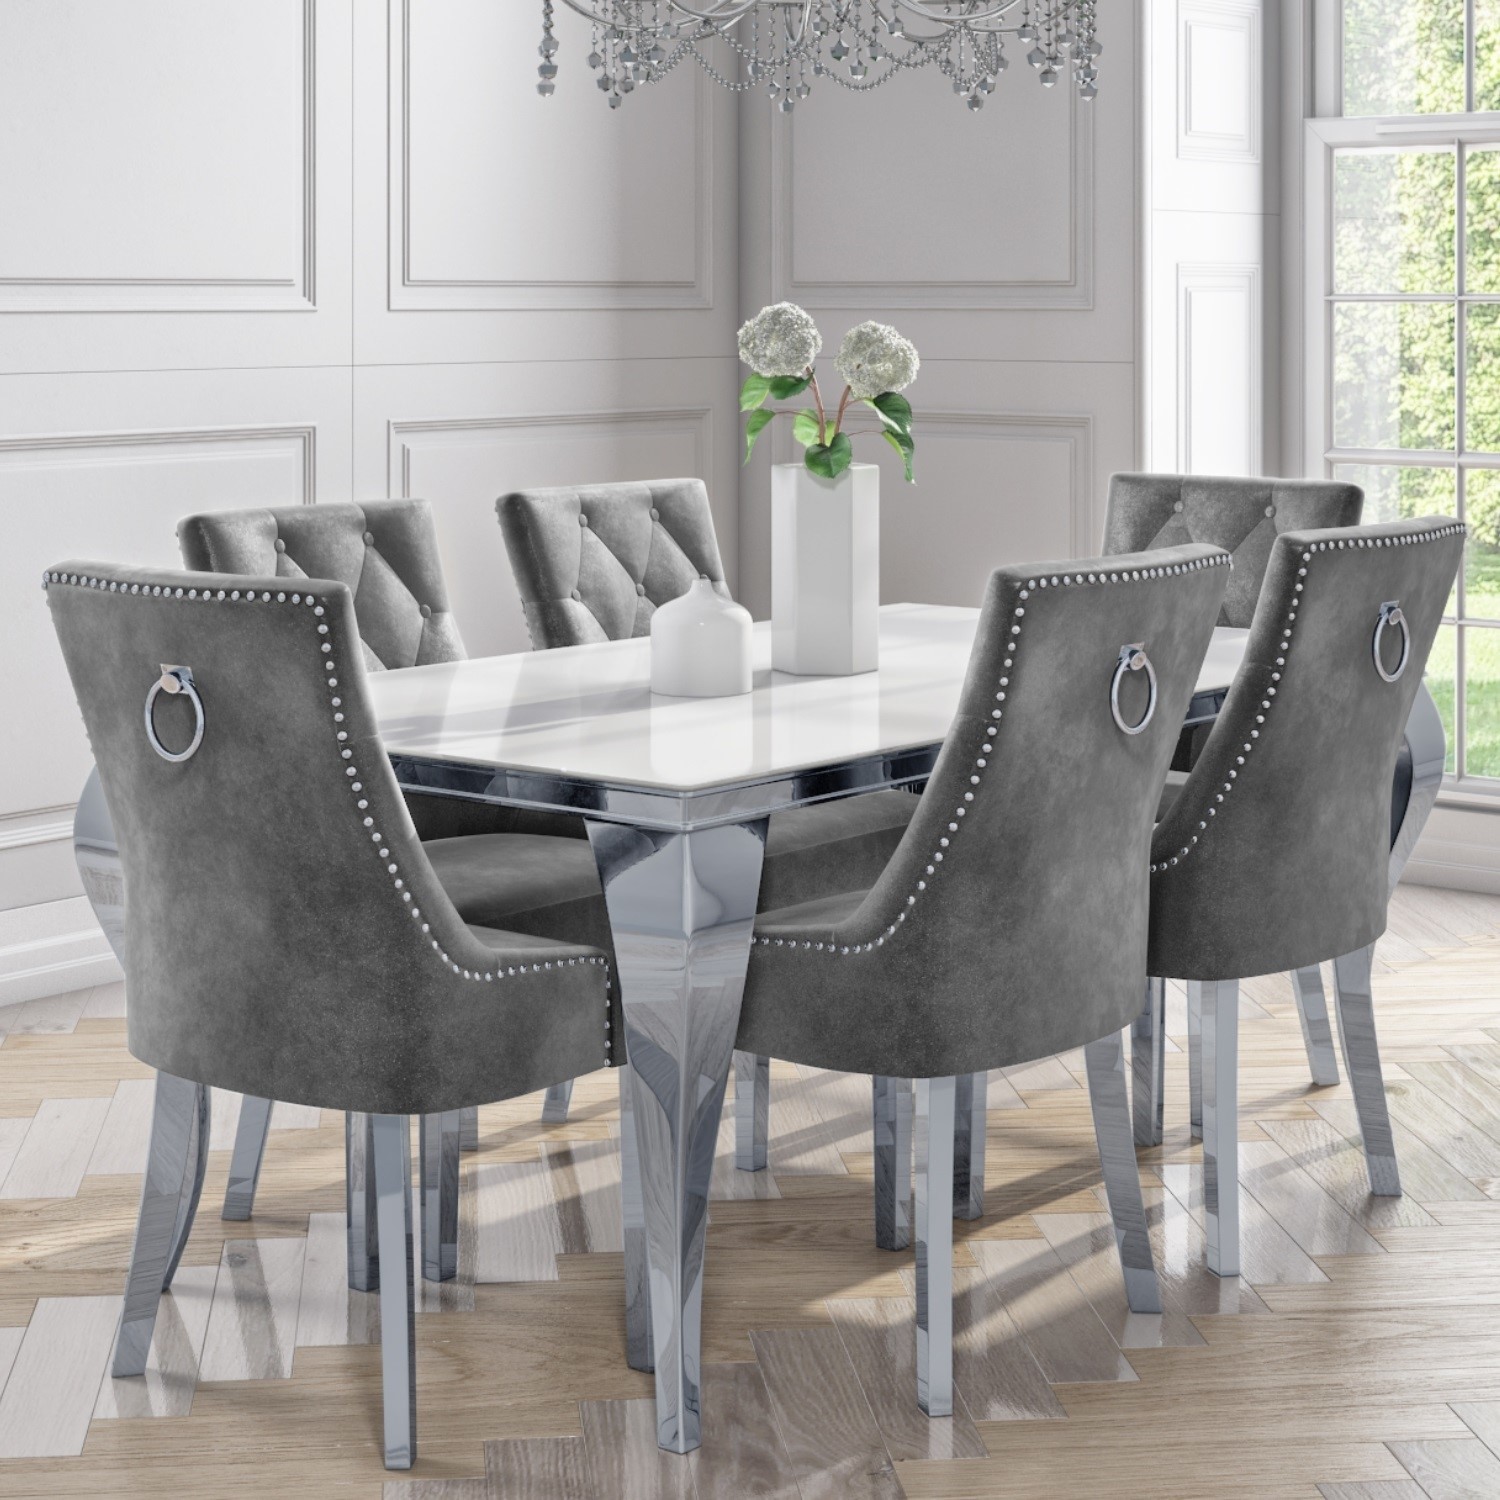 6 Seater Dining Set With White And, 6 Seater Round Dining Table And Chairs Uk